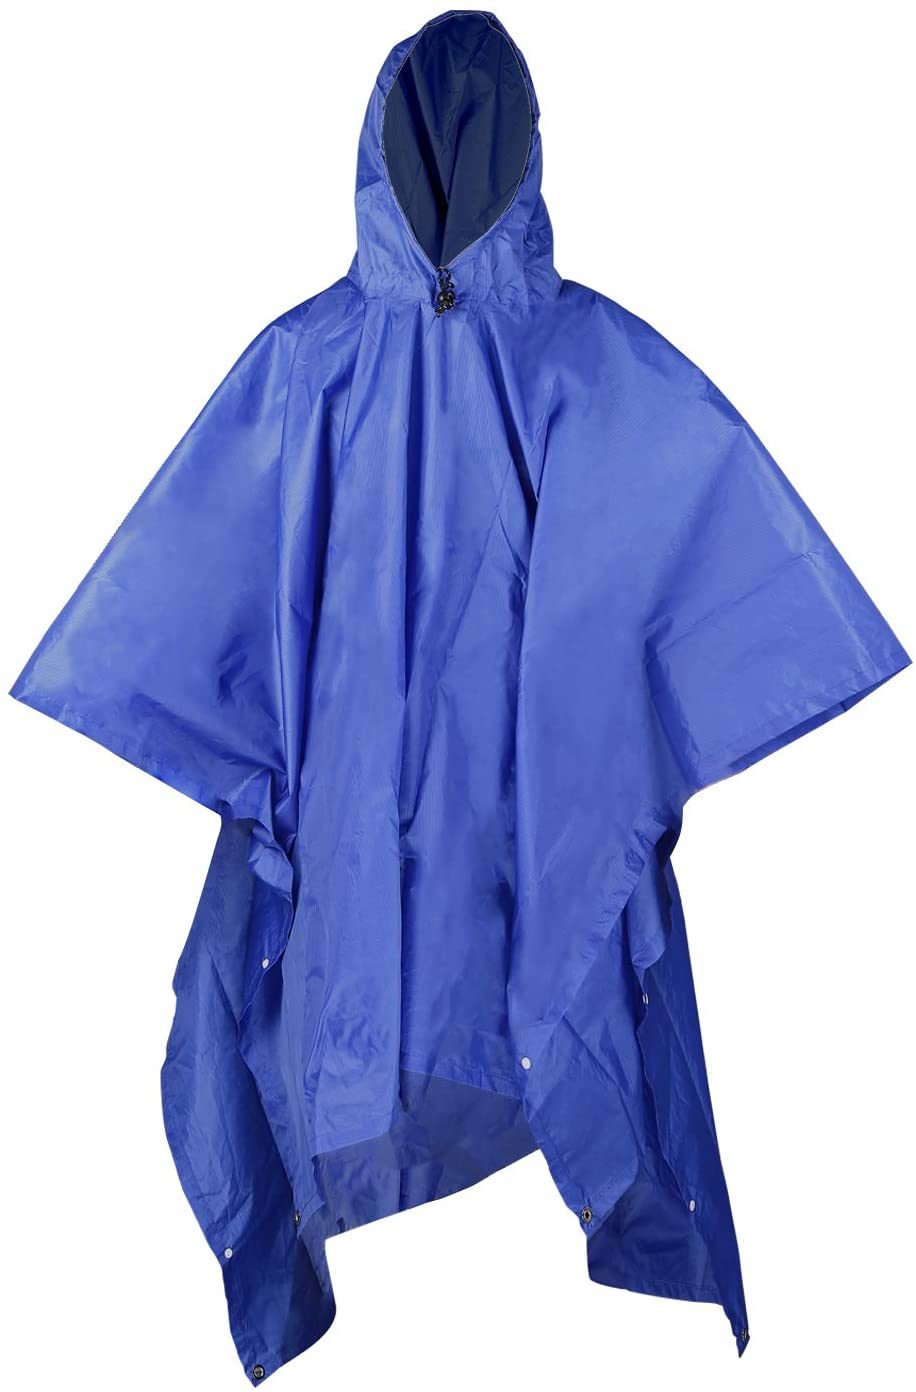 3 in 1 Rain Poncho with Carry Pouch, Multifunctional Lightweight Raincoat with Hood, Reusable Waterproof Raincoat Poncho for Bike Hiking Camping Outdoor Festiva